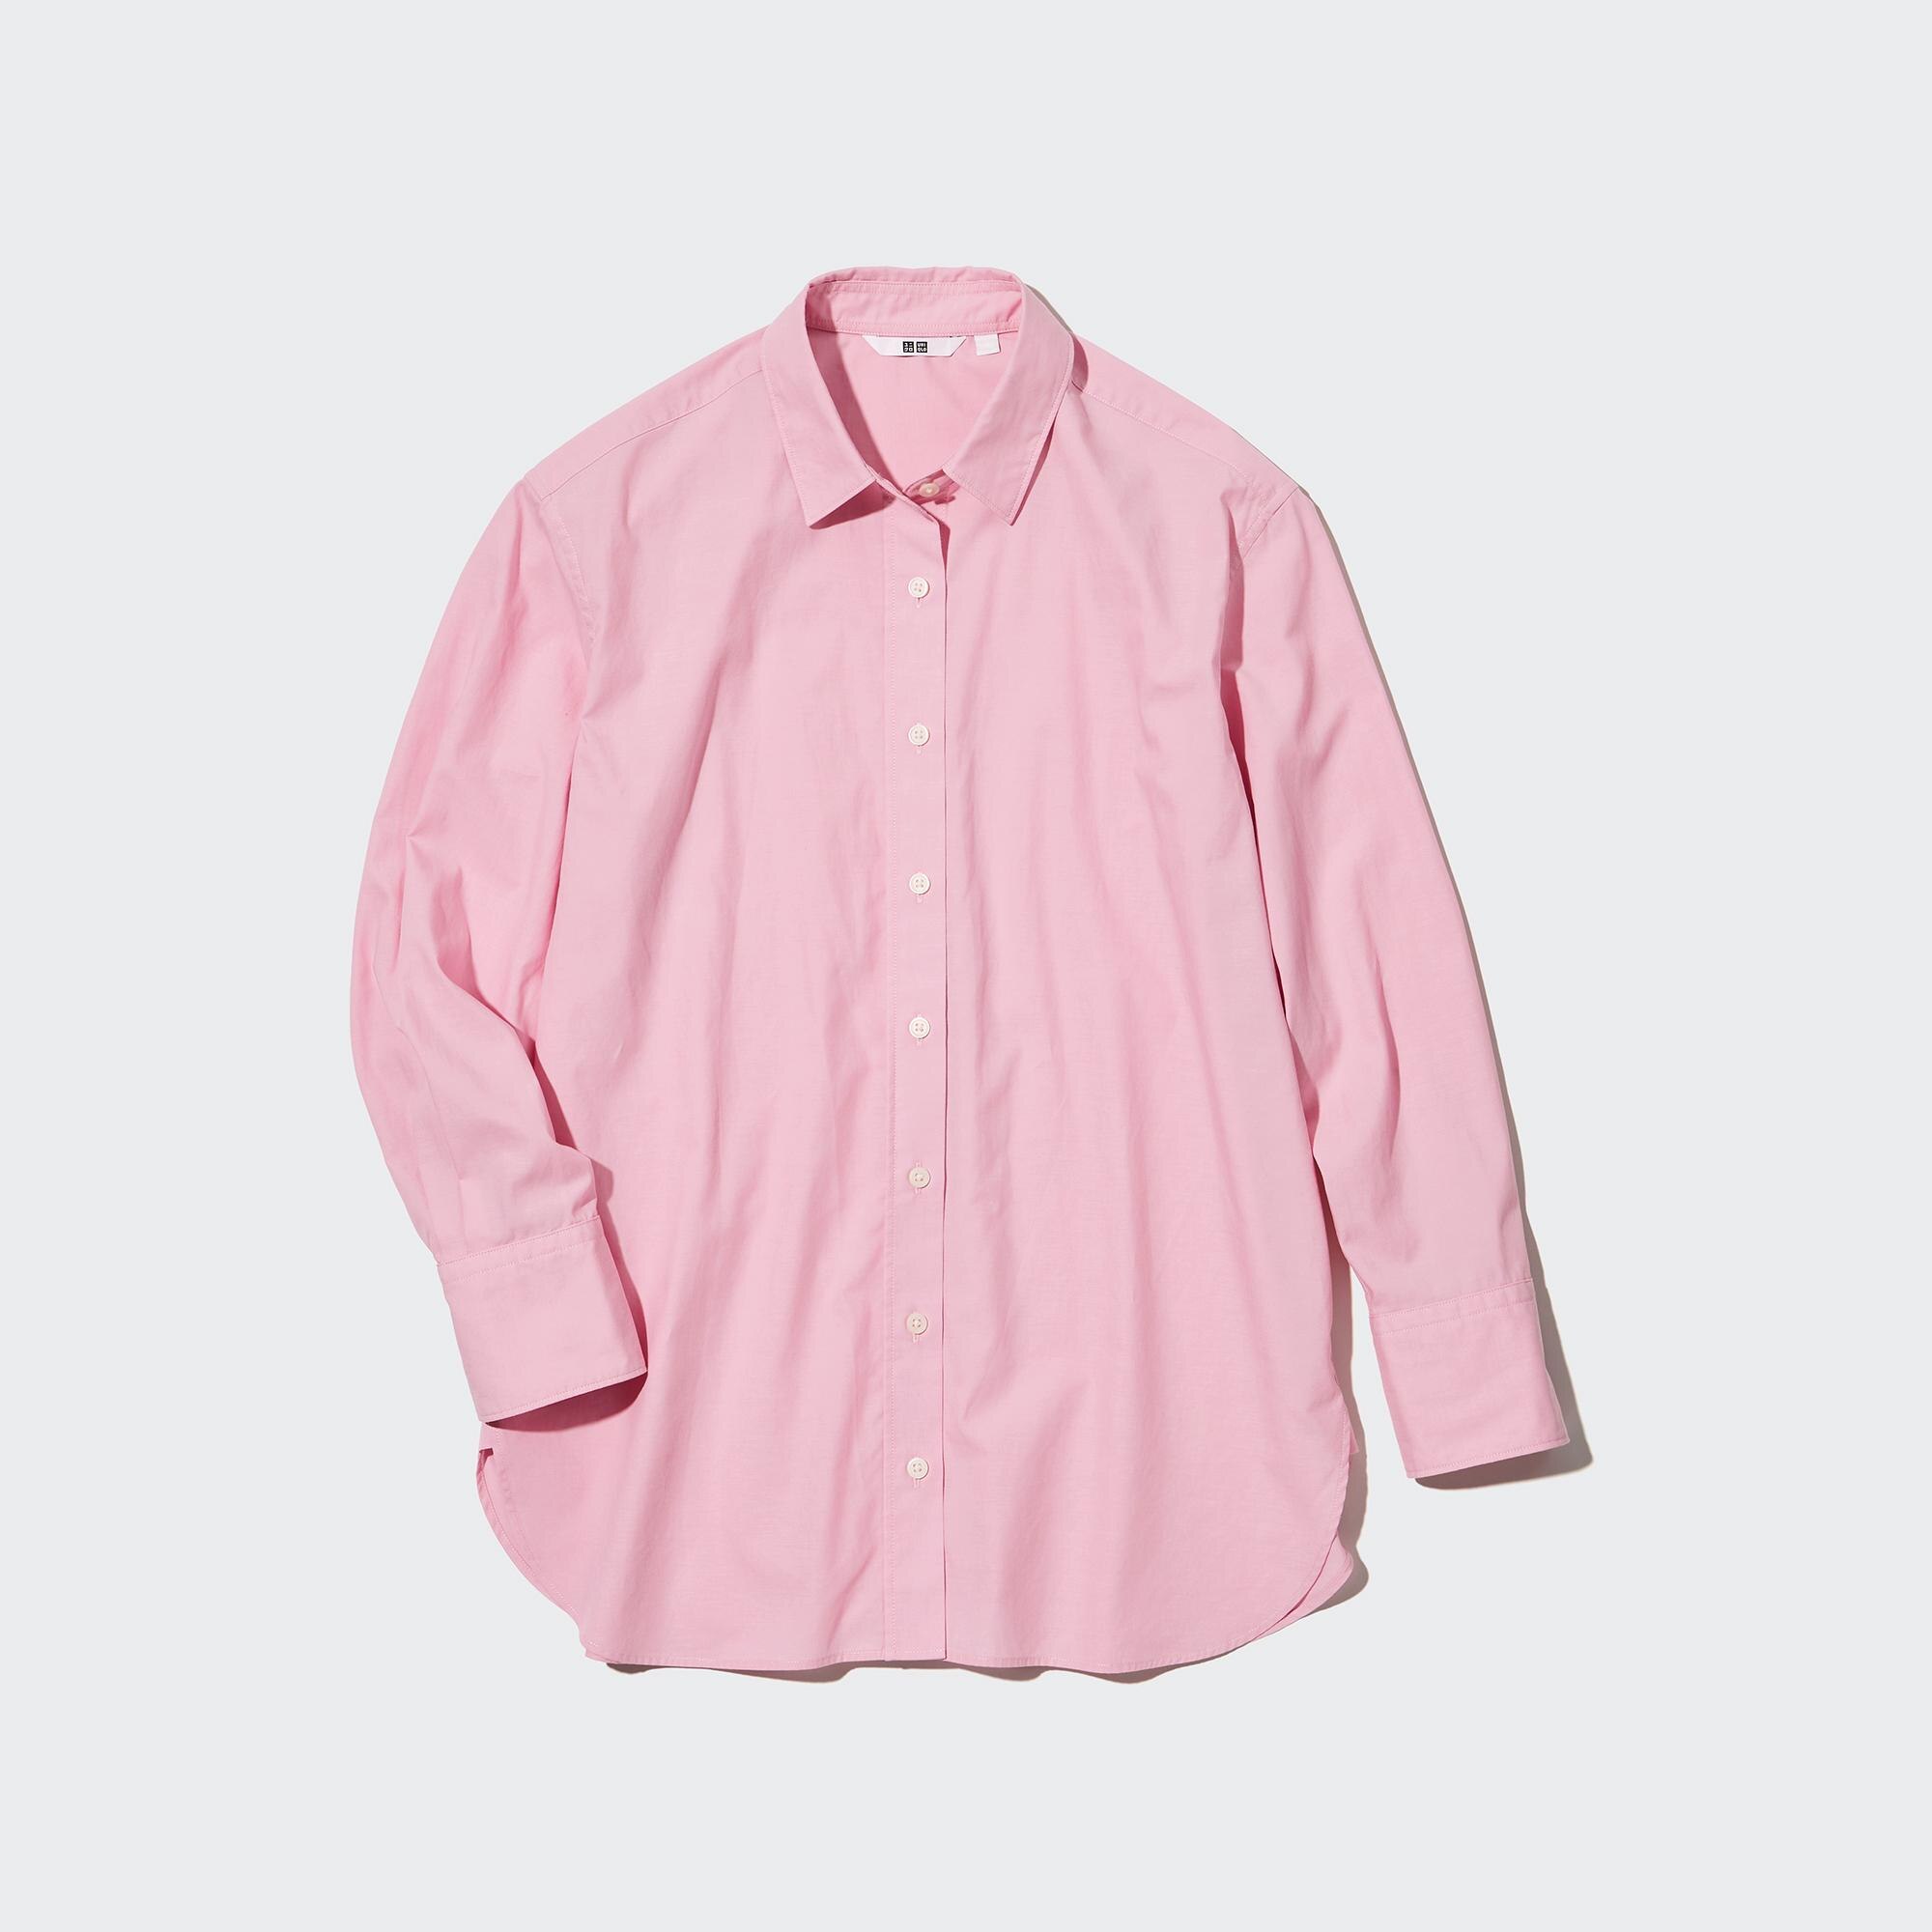 EXTRA FINE COTTON BROADCLOTH LONG SLEEVE SHIRT  UNIQLO VN